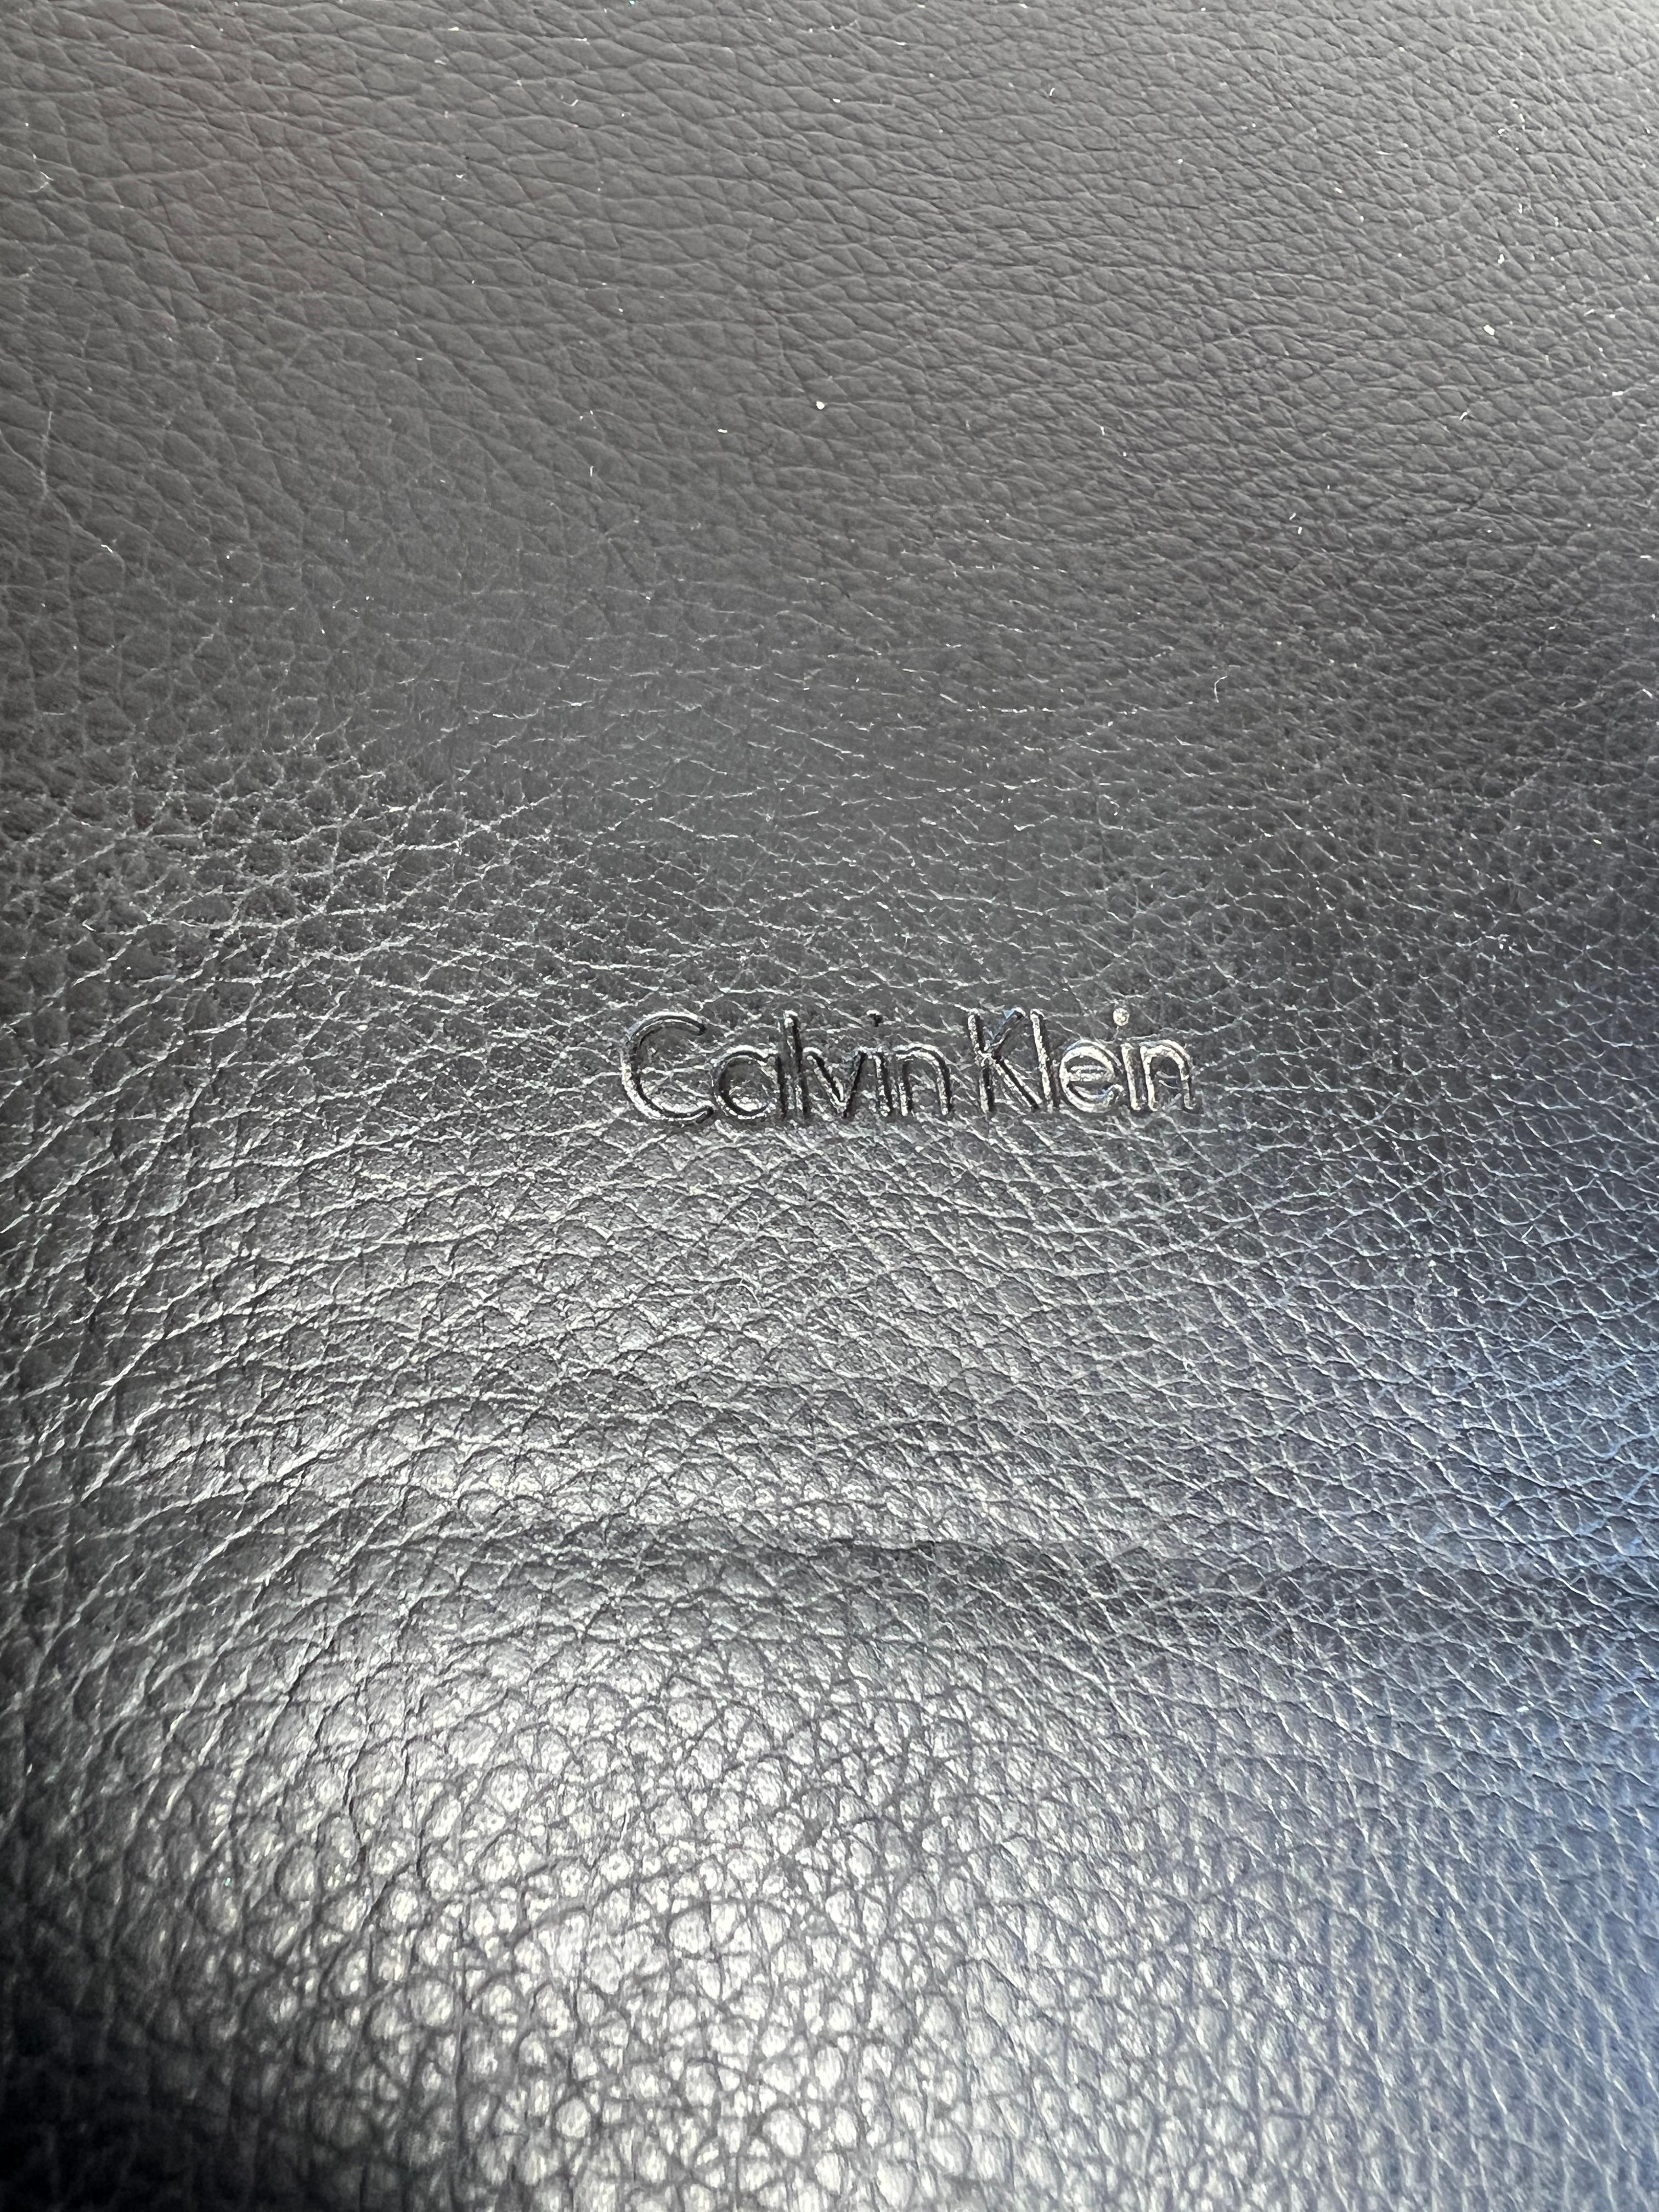 Calvin Klein Jewelry Box FULL of Various Jewelry & Jewelry Parts